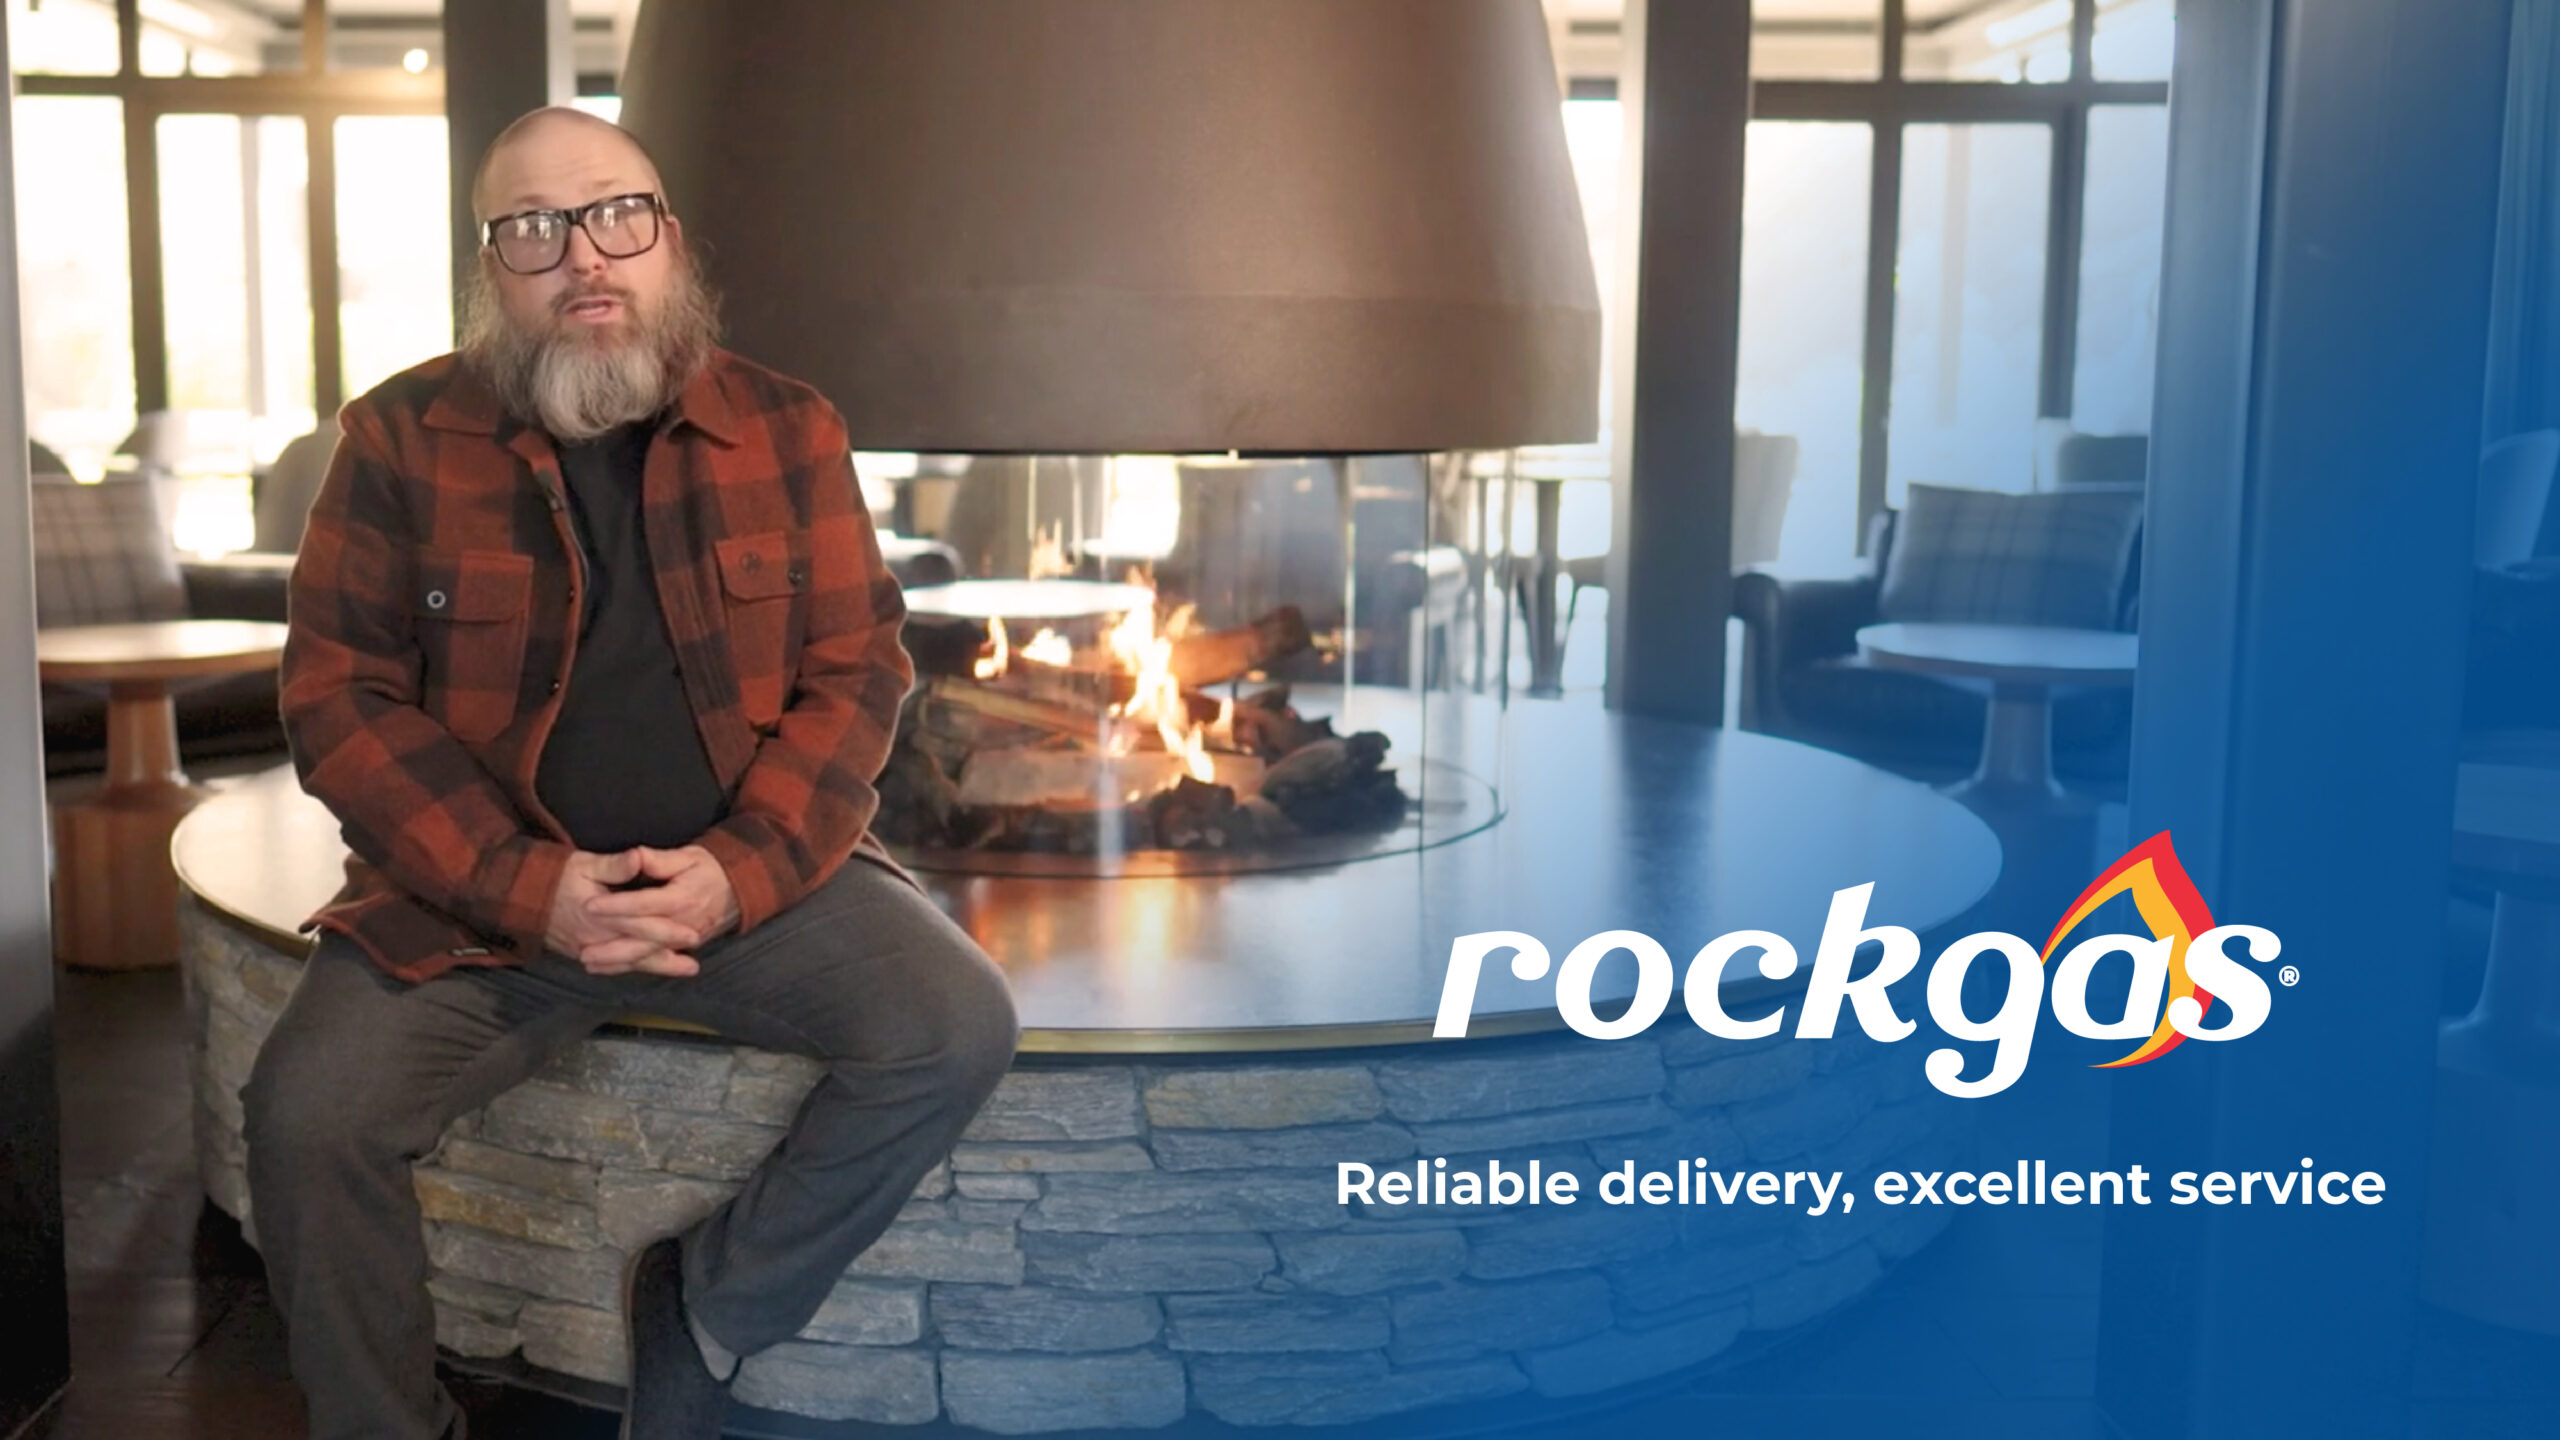 Gibbston Valley relies on Rockgas to delight their guests